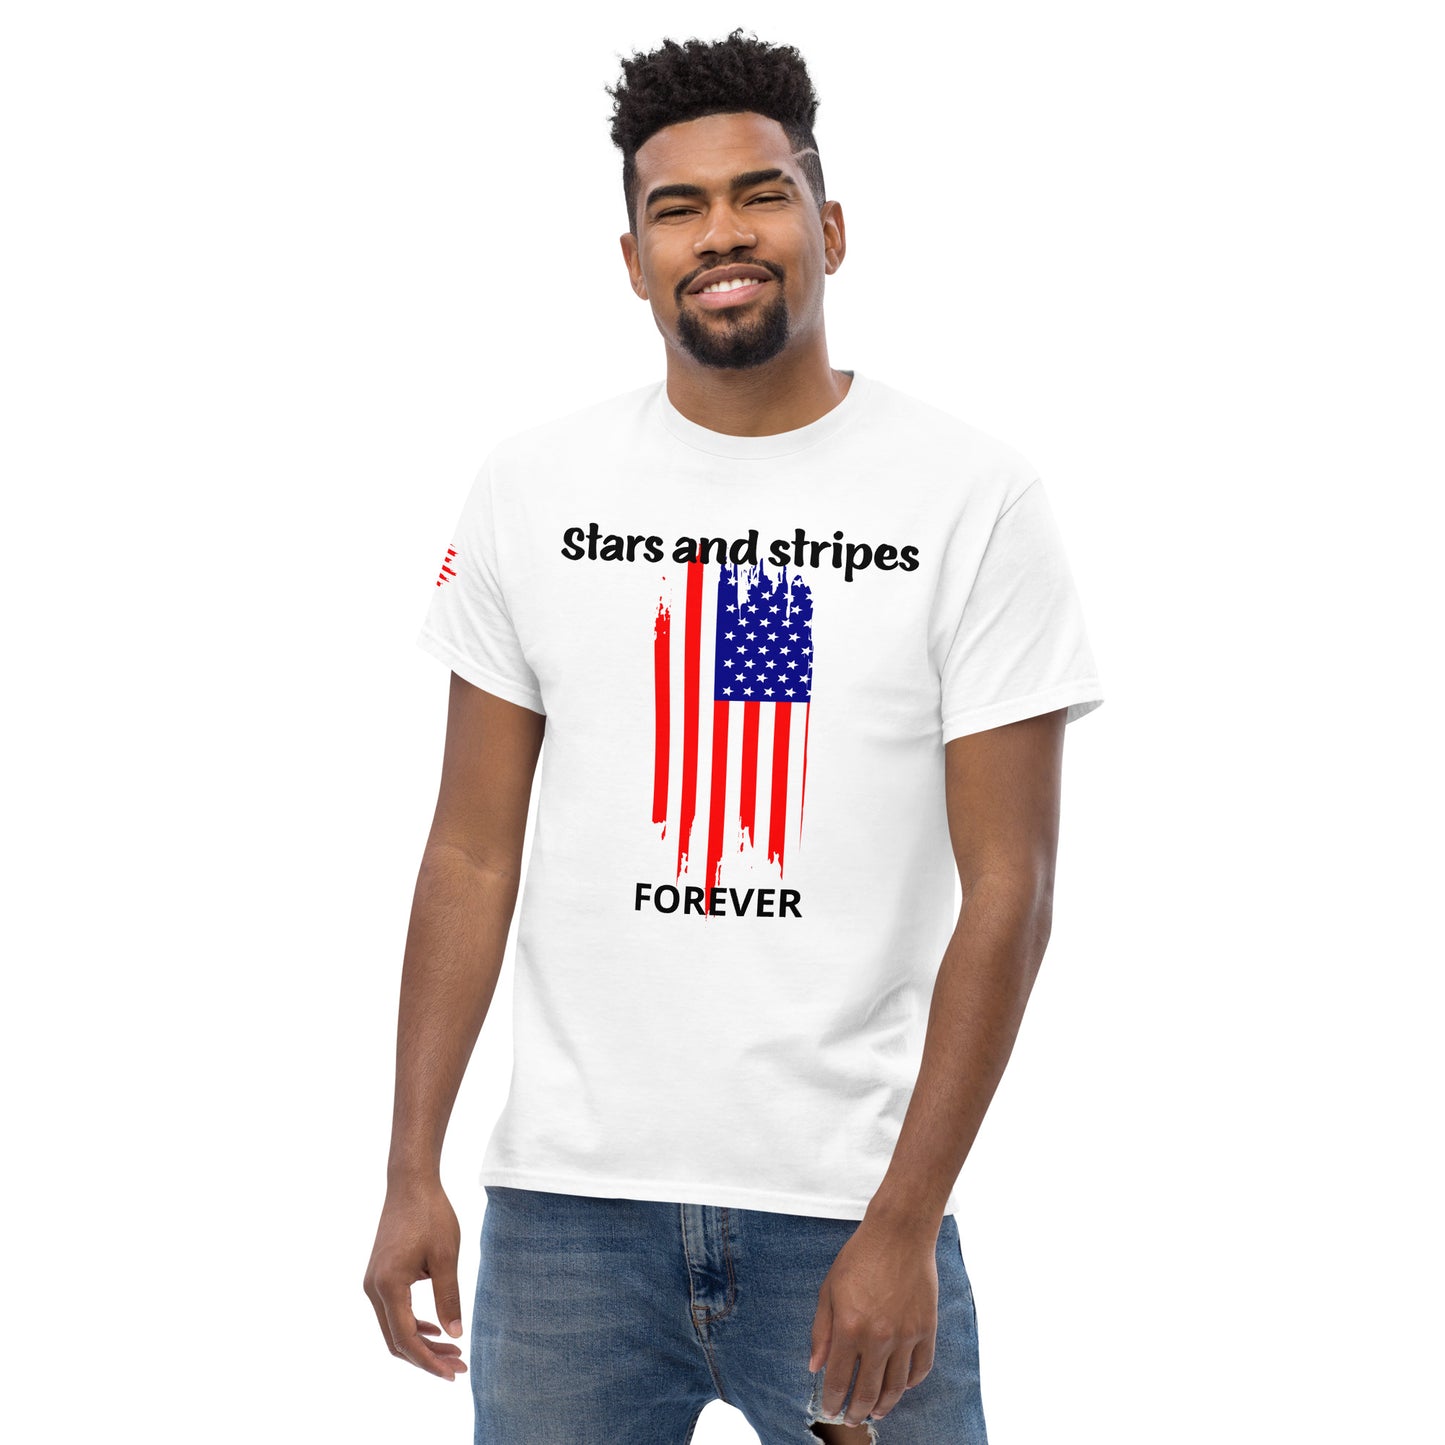 Stars and Stripes forever - Men's classic tee